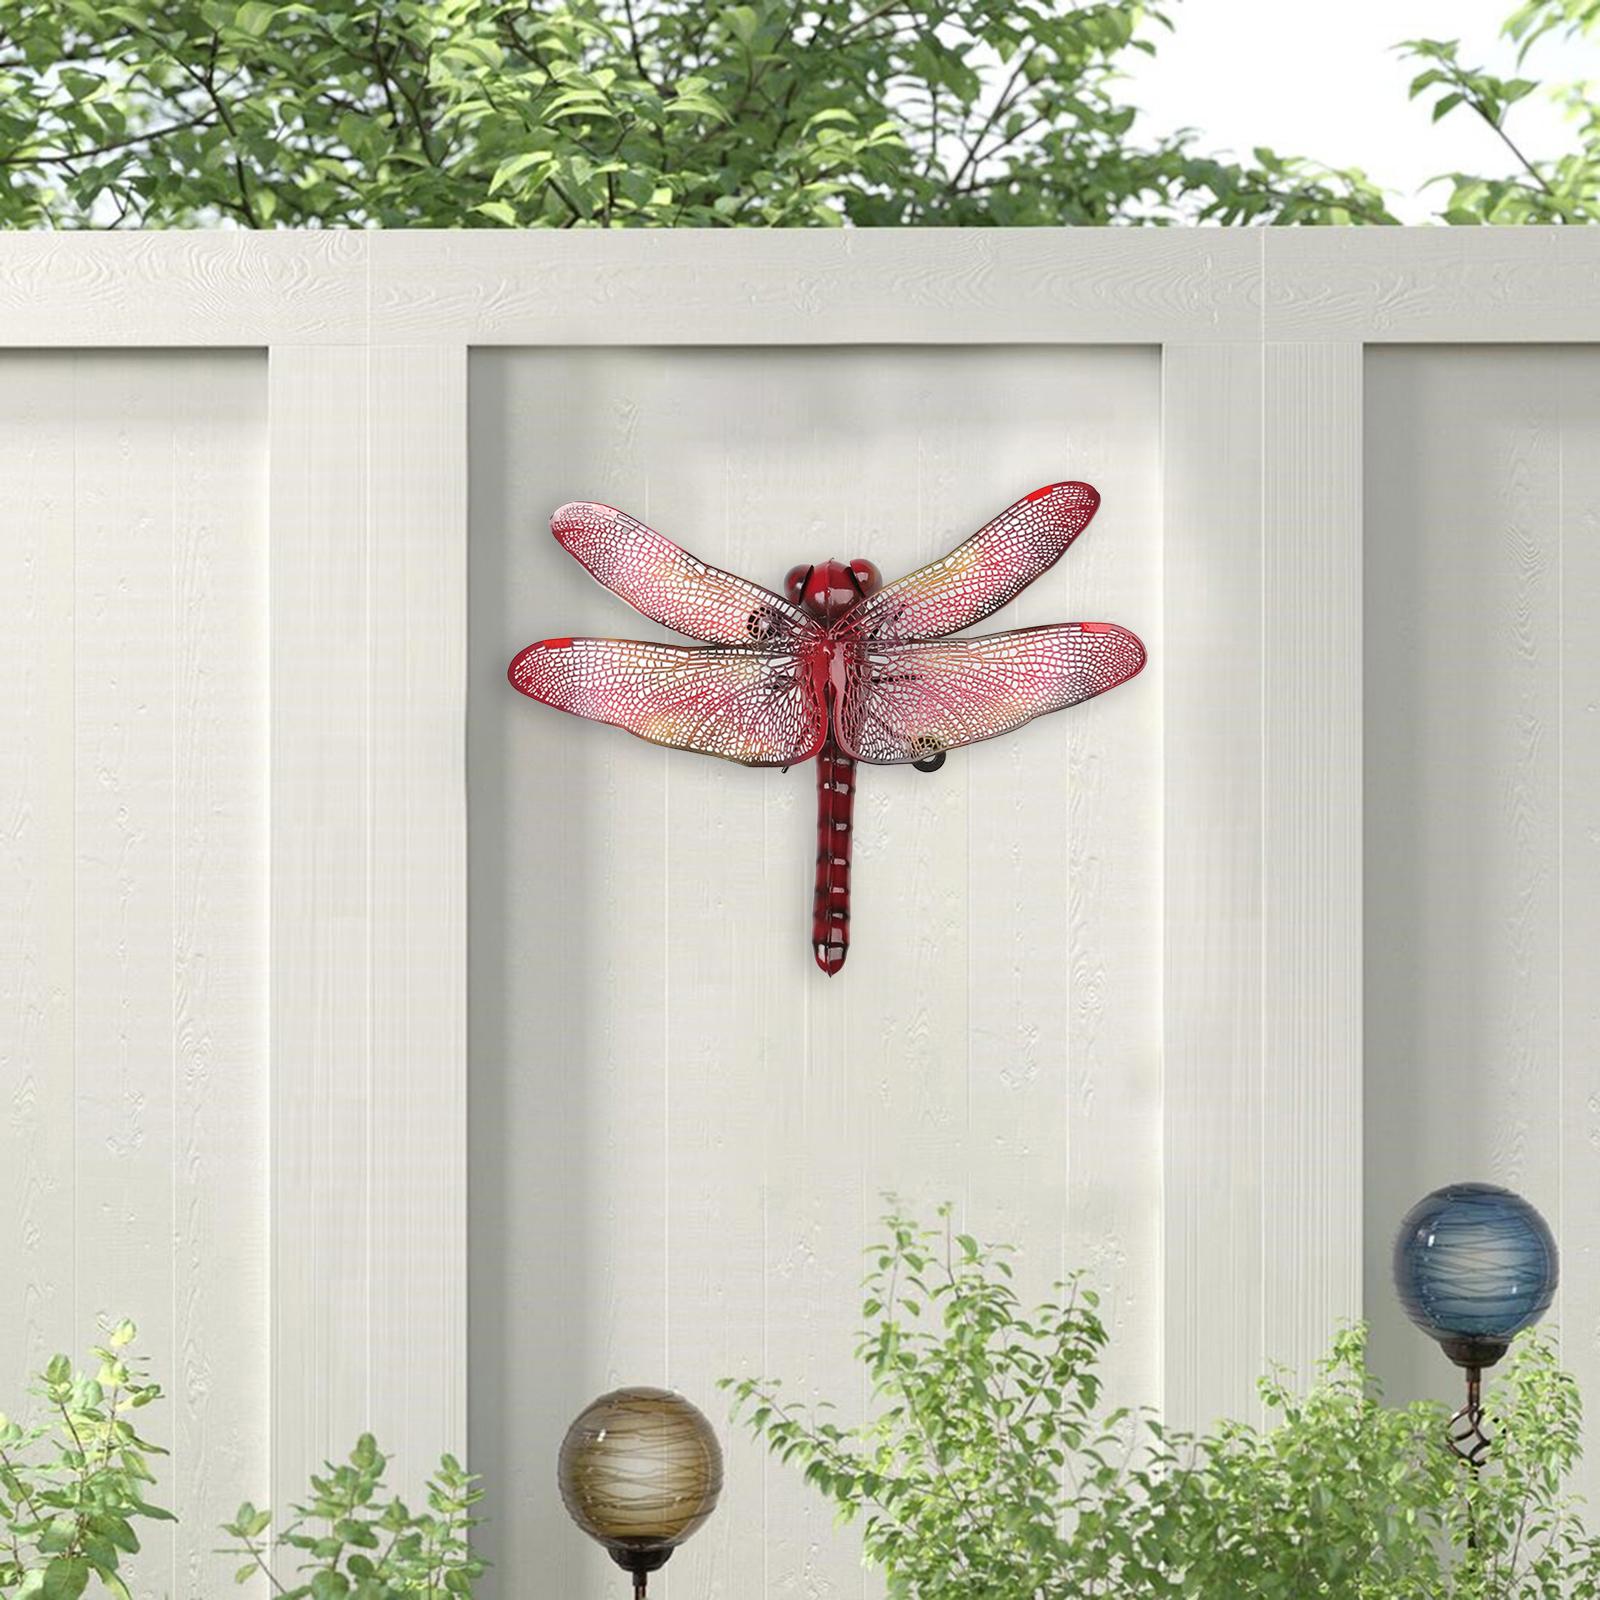 Metal Wall Dragonfly Decorations Art Crafts Decoration for Farmhouse Garden red